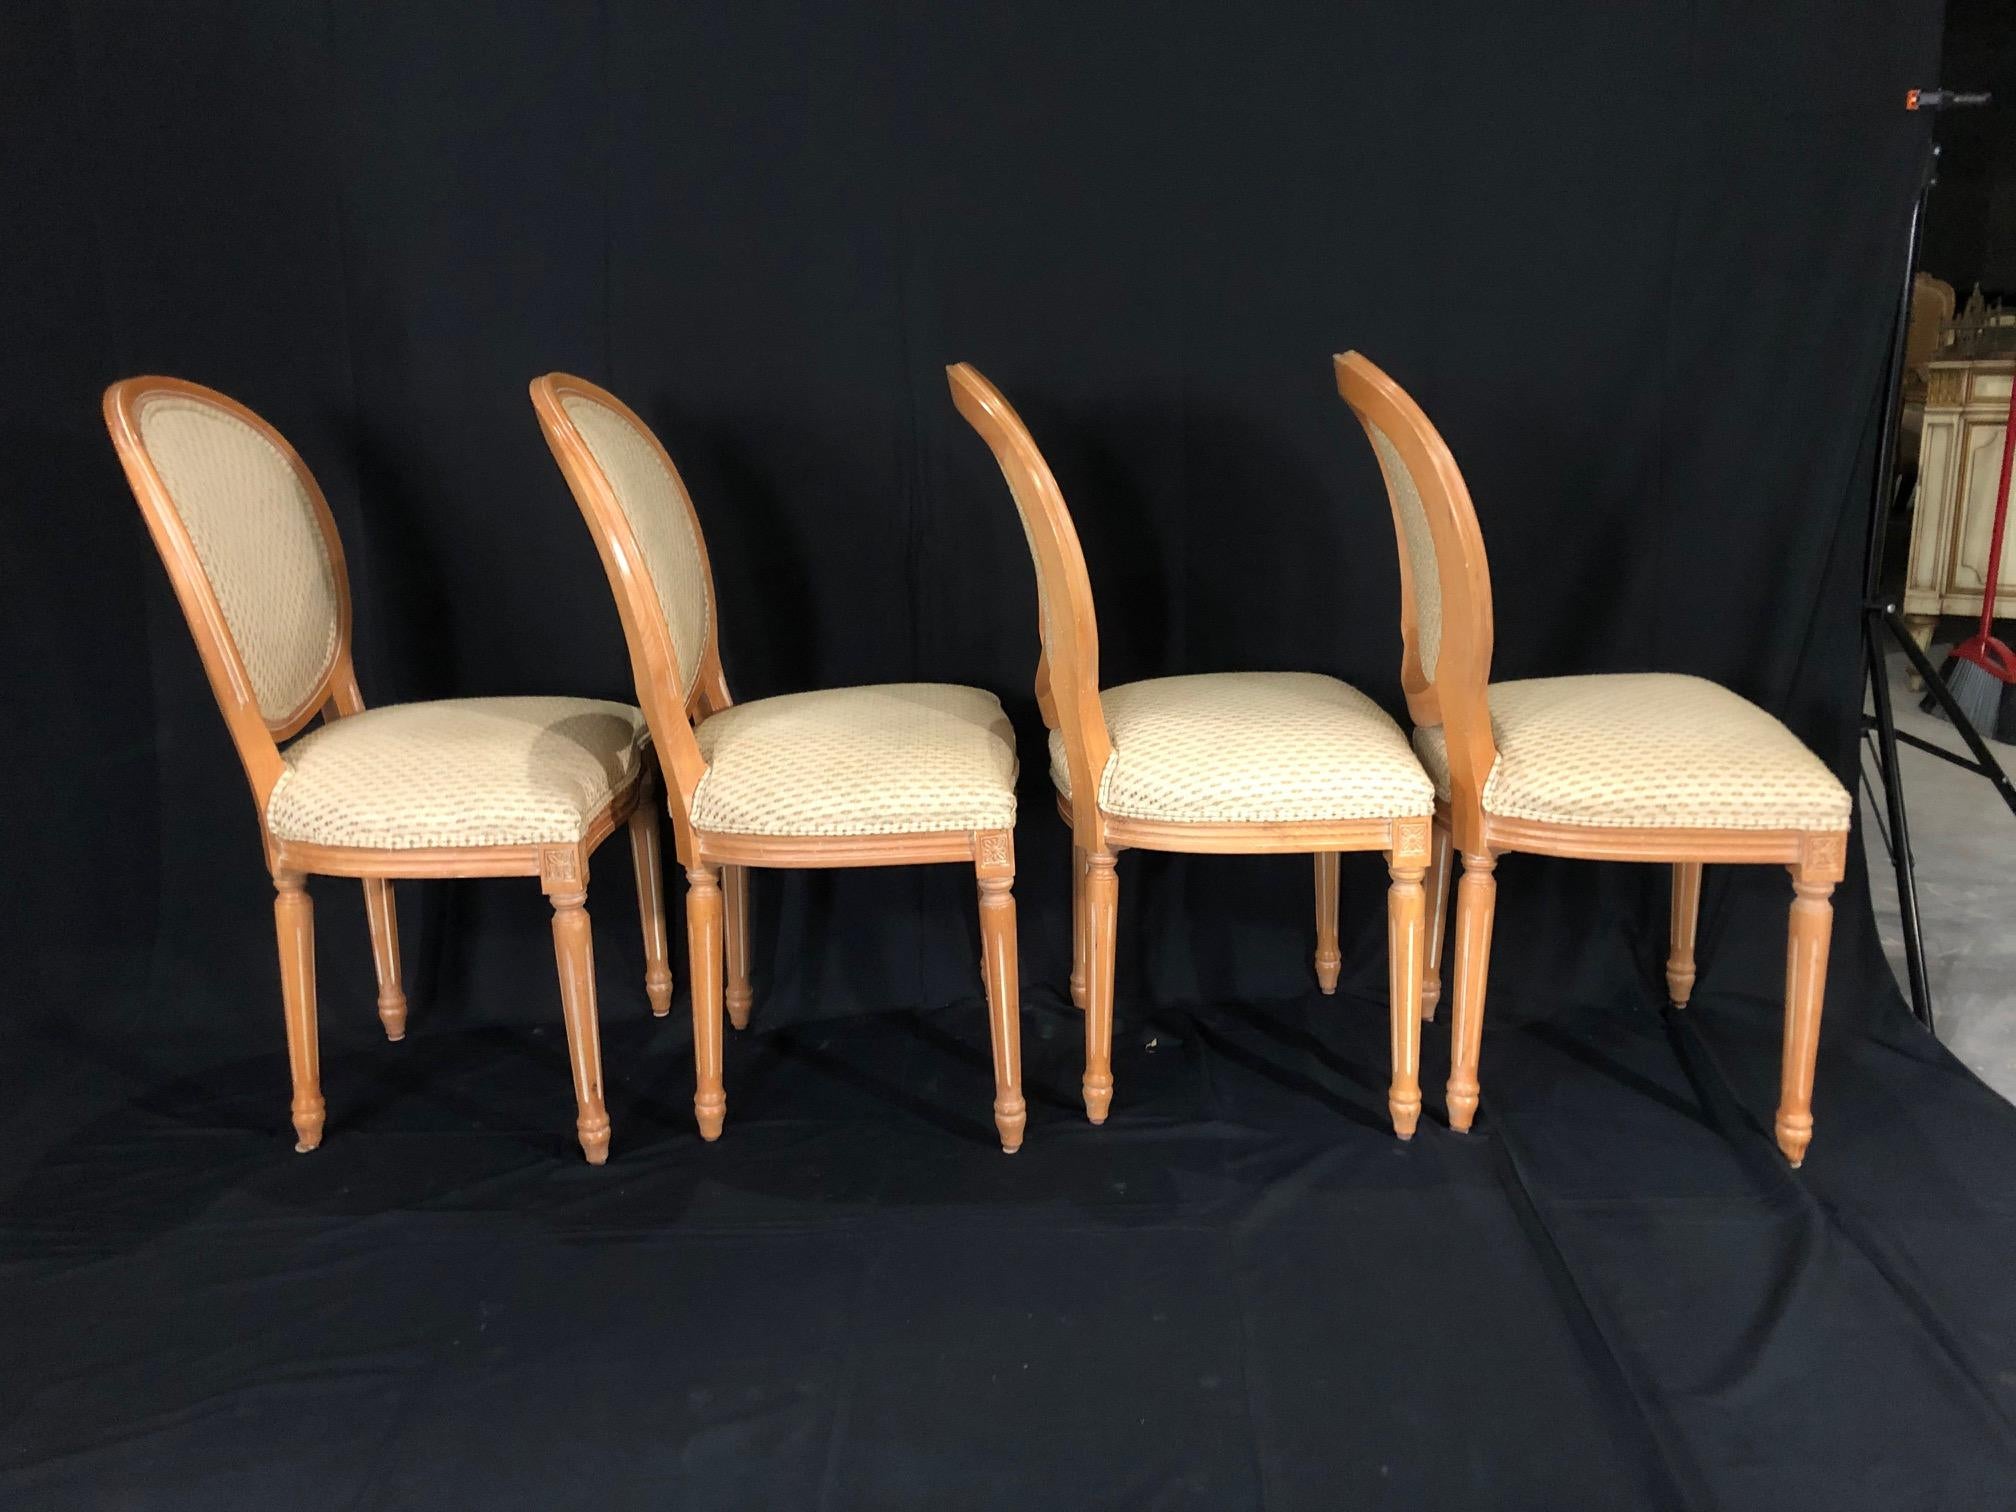 A set of 4 custom Louis XVI style carved wood dining chairs upholstered in lovely neutral ivory material with beige flecks.